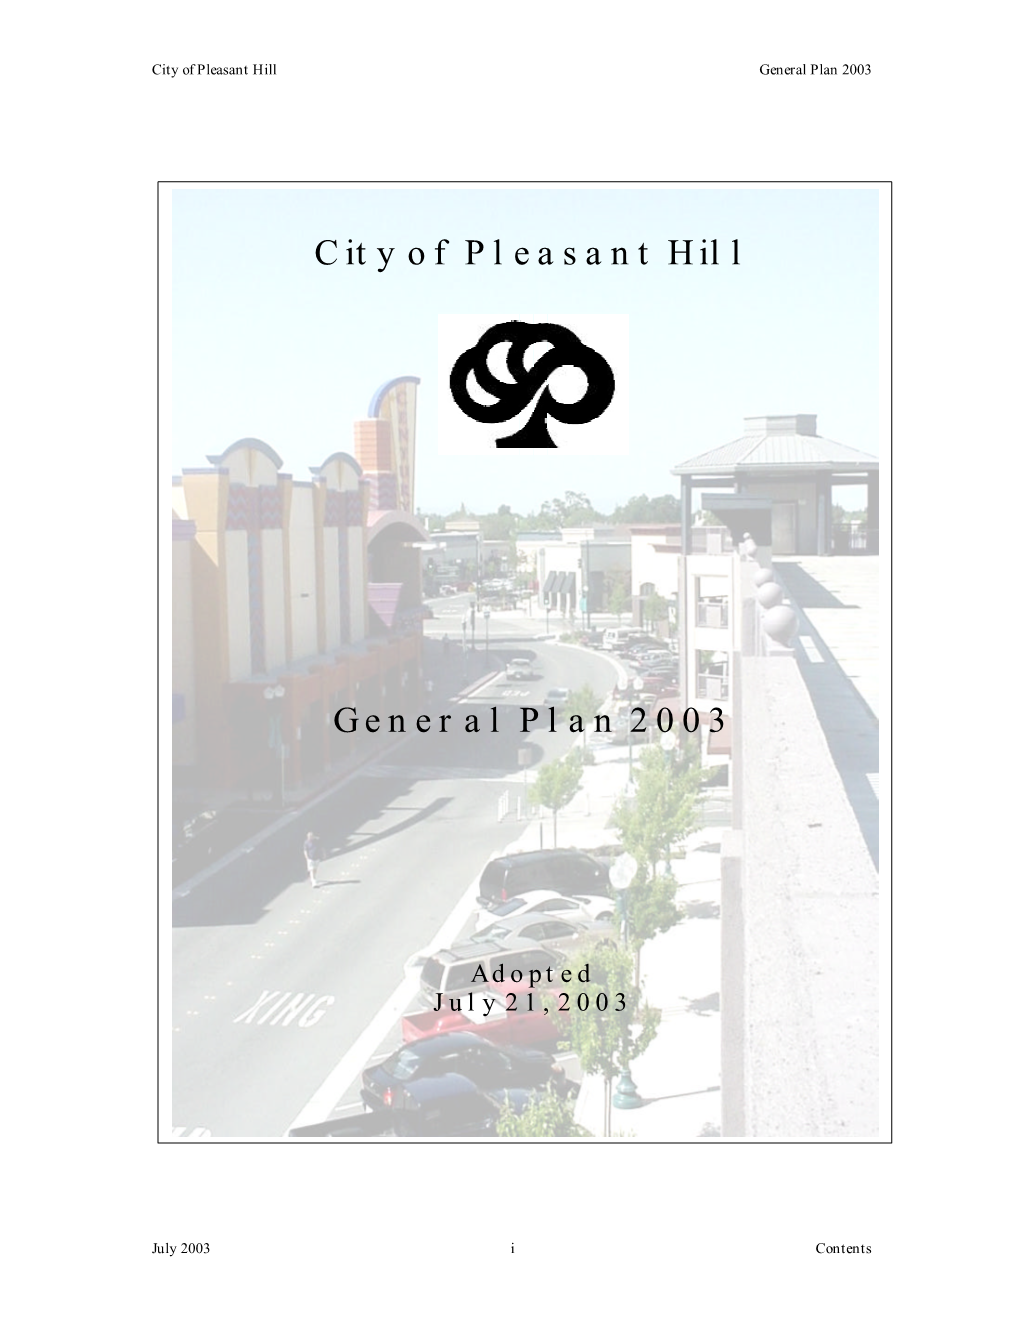 City of Pleasant Hill General Plan 2003